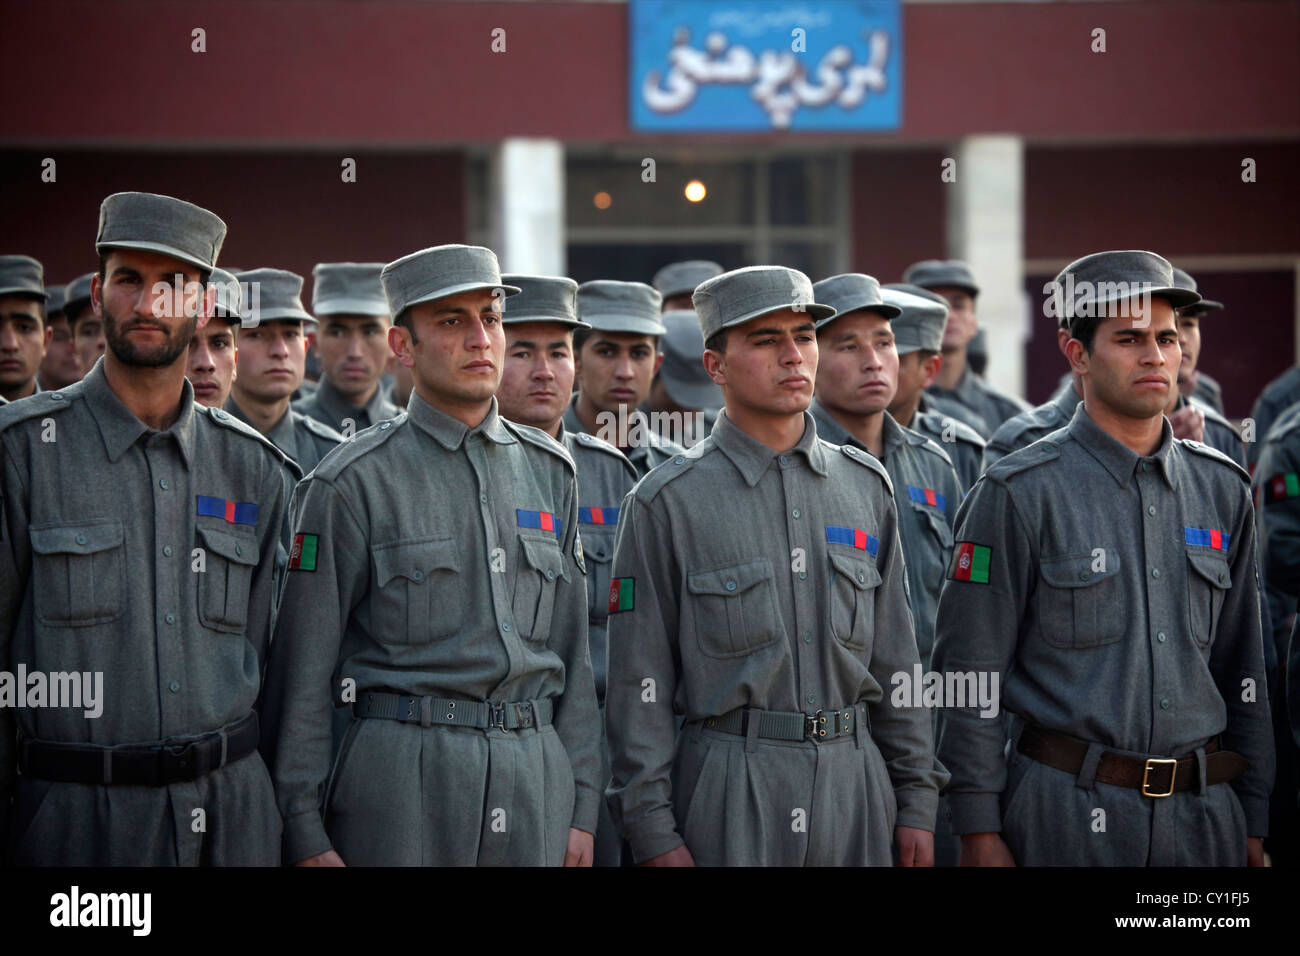 graduation of Afghan National Police officers in Kabul. Stock Photo